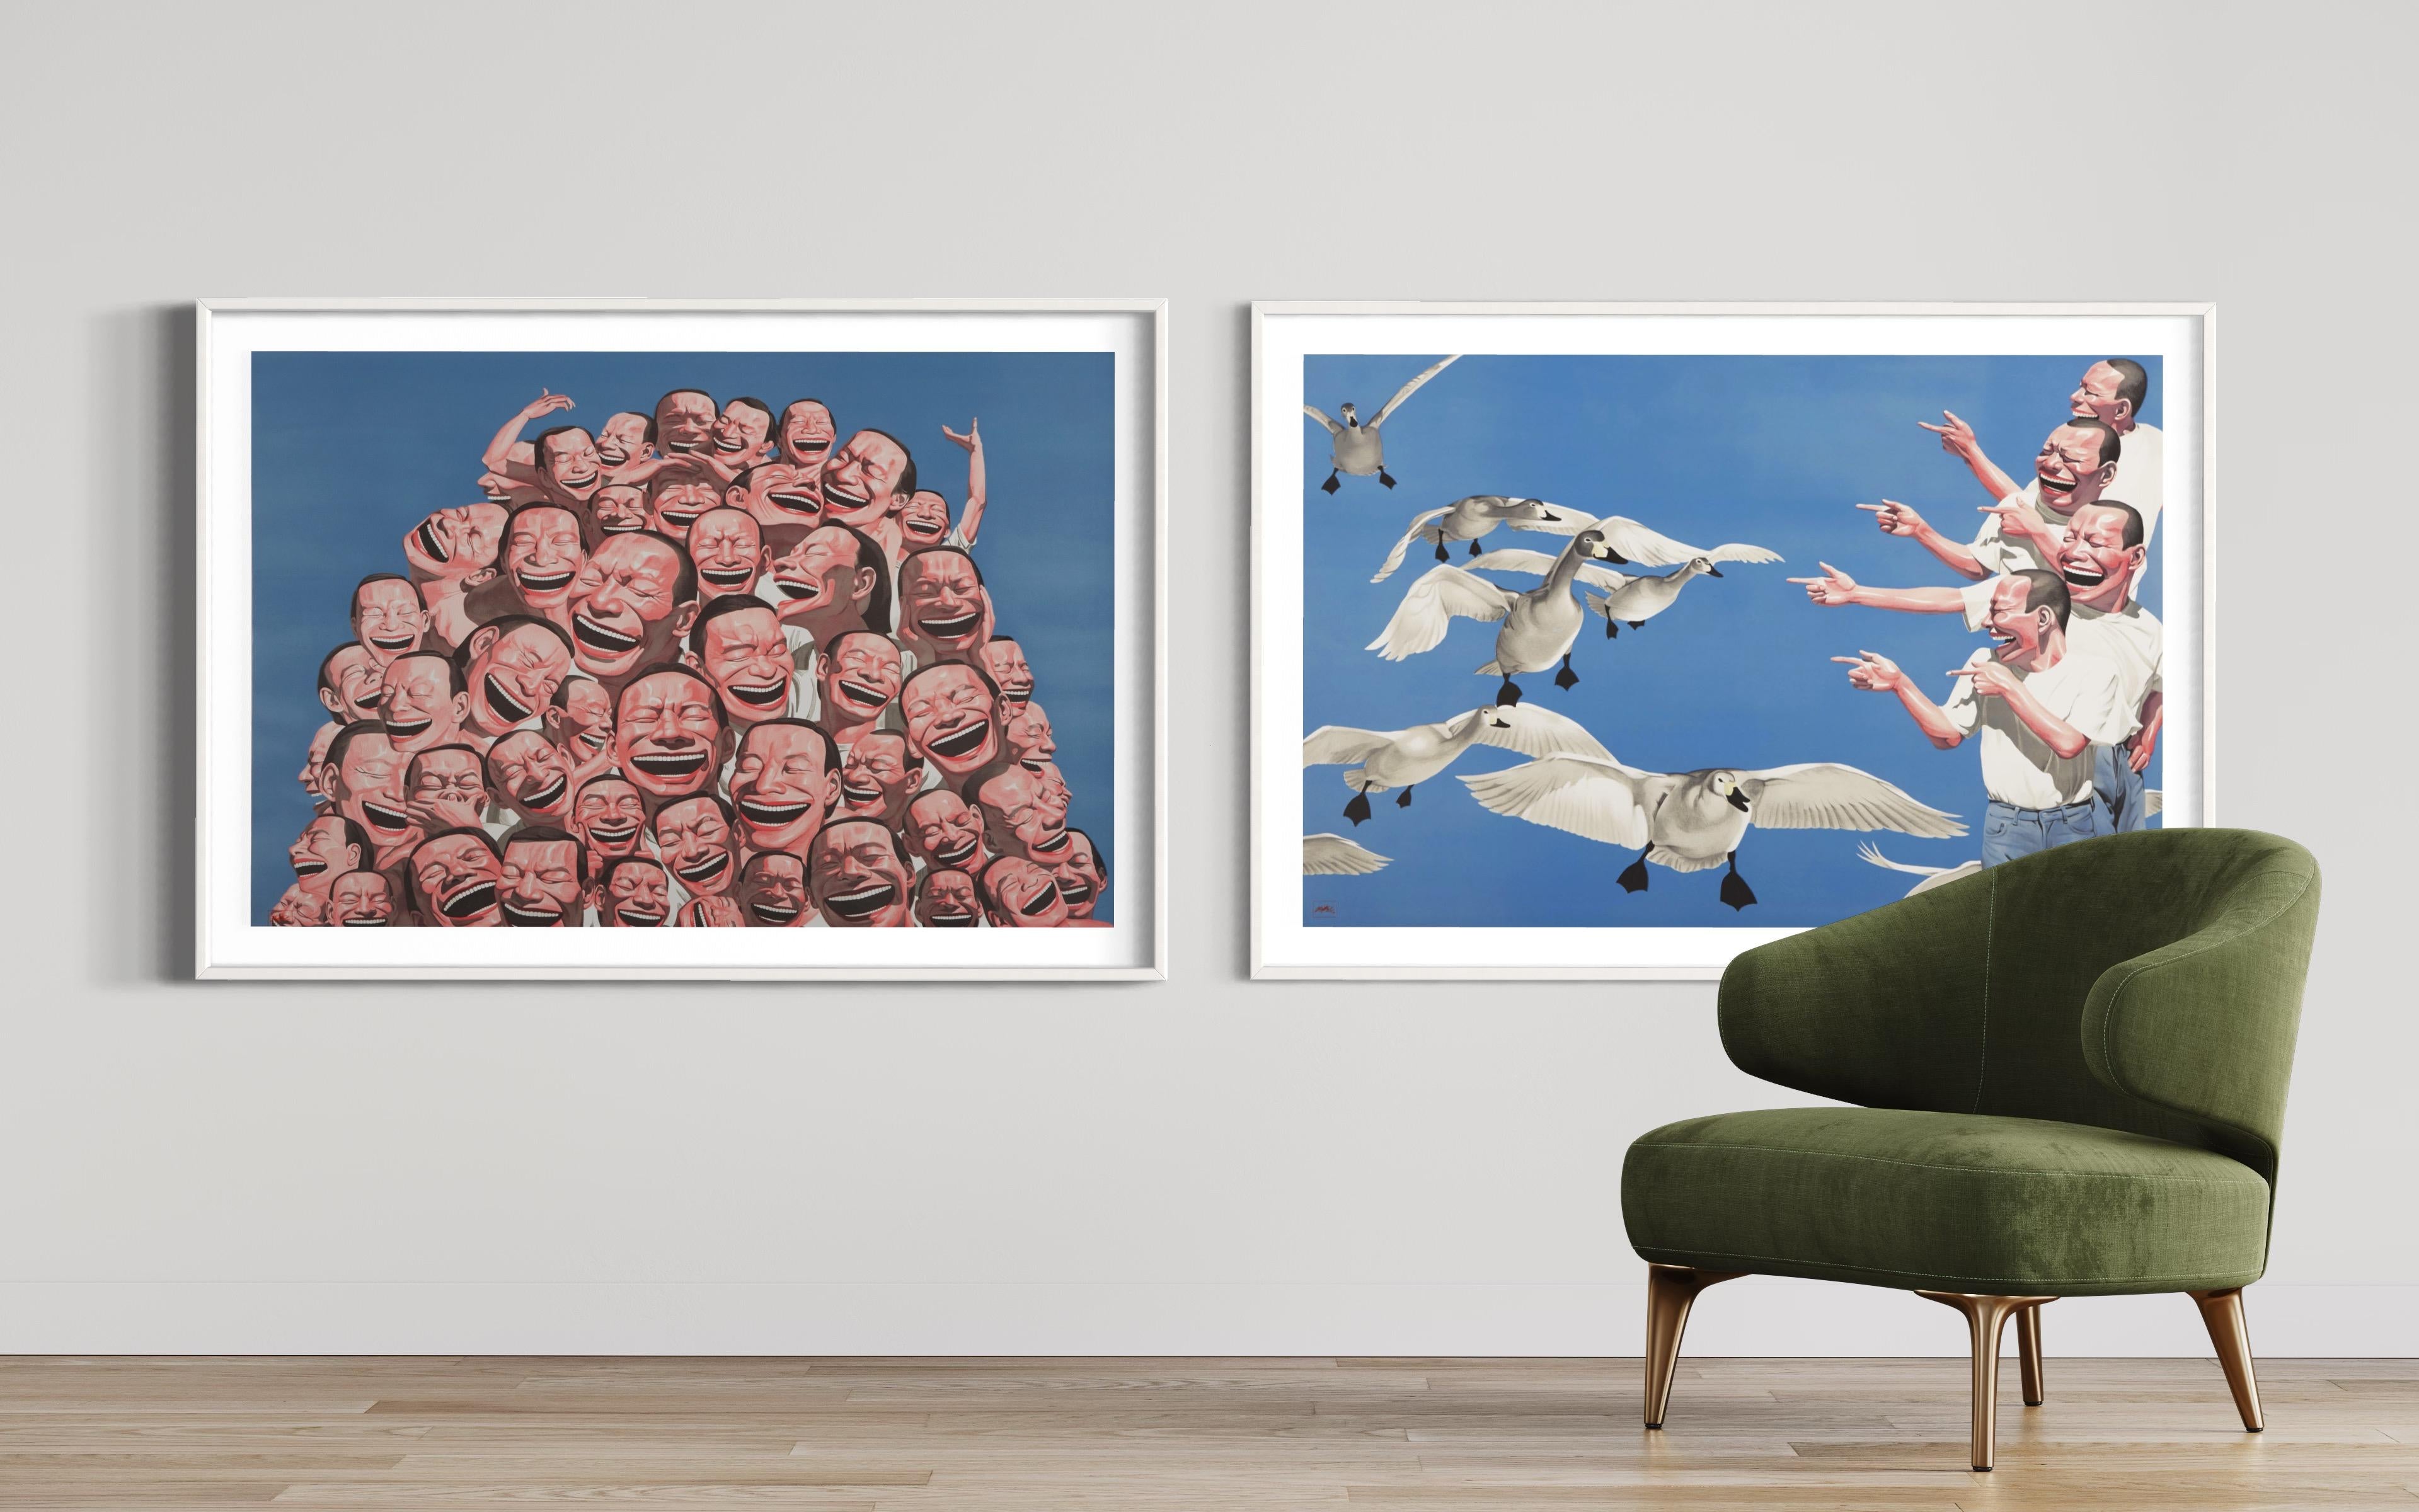 Yue Minjun, Snatched Ecstasy (Portfolio of 20)
Contemporary, 21st Century, Lithograph, Limited Edition, Chinese
Lithograph
Edition of 130
80 × 120 cm (47 1/5 × 31 1/2 in)
Each print has a Stamped Signature and is numbered in Roman numerals
In mint